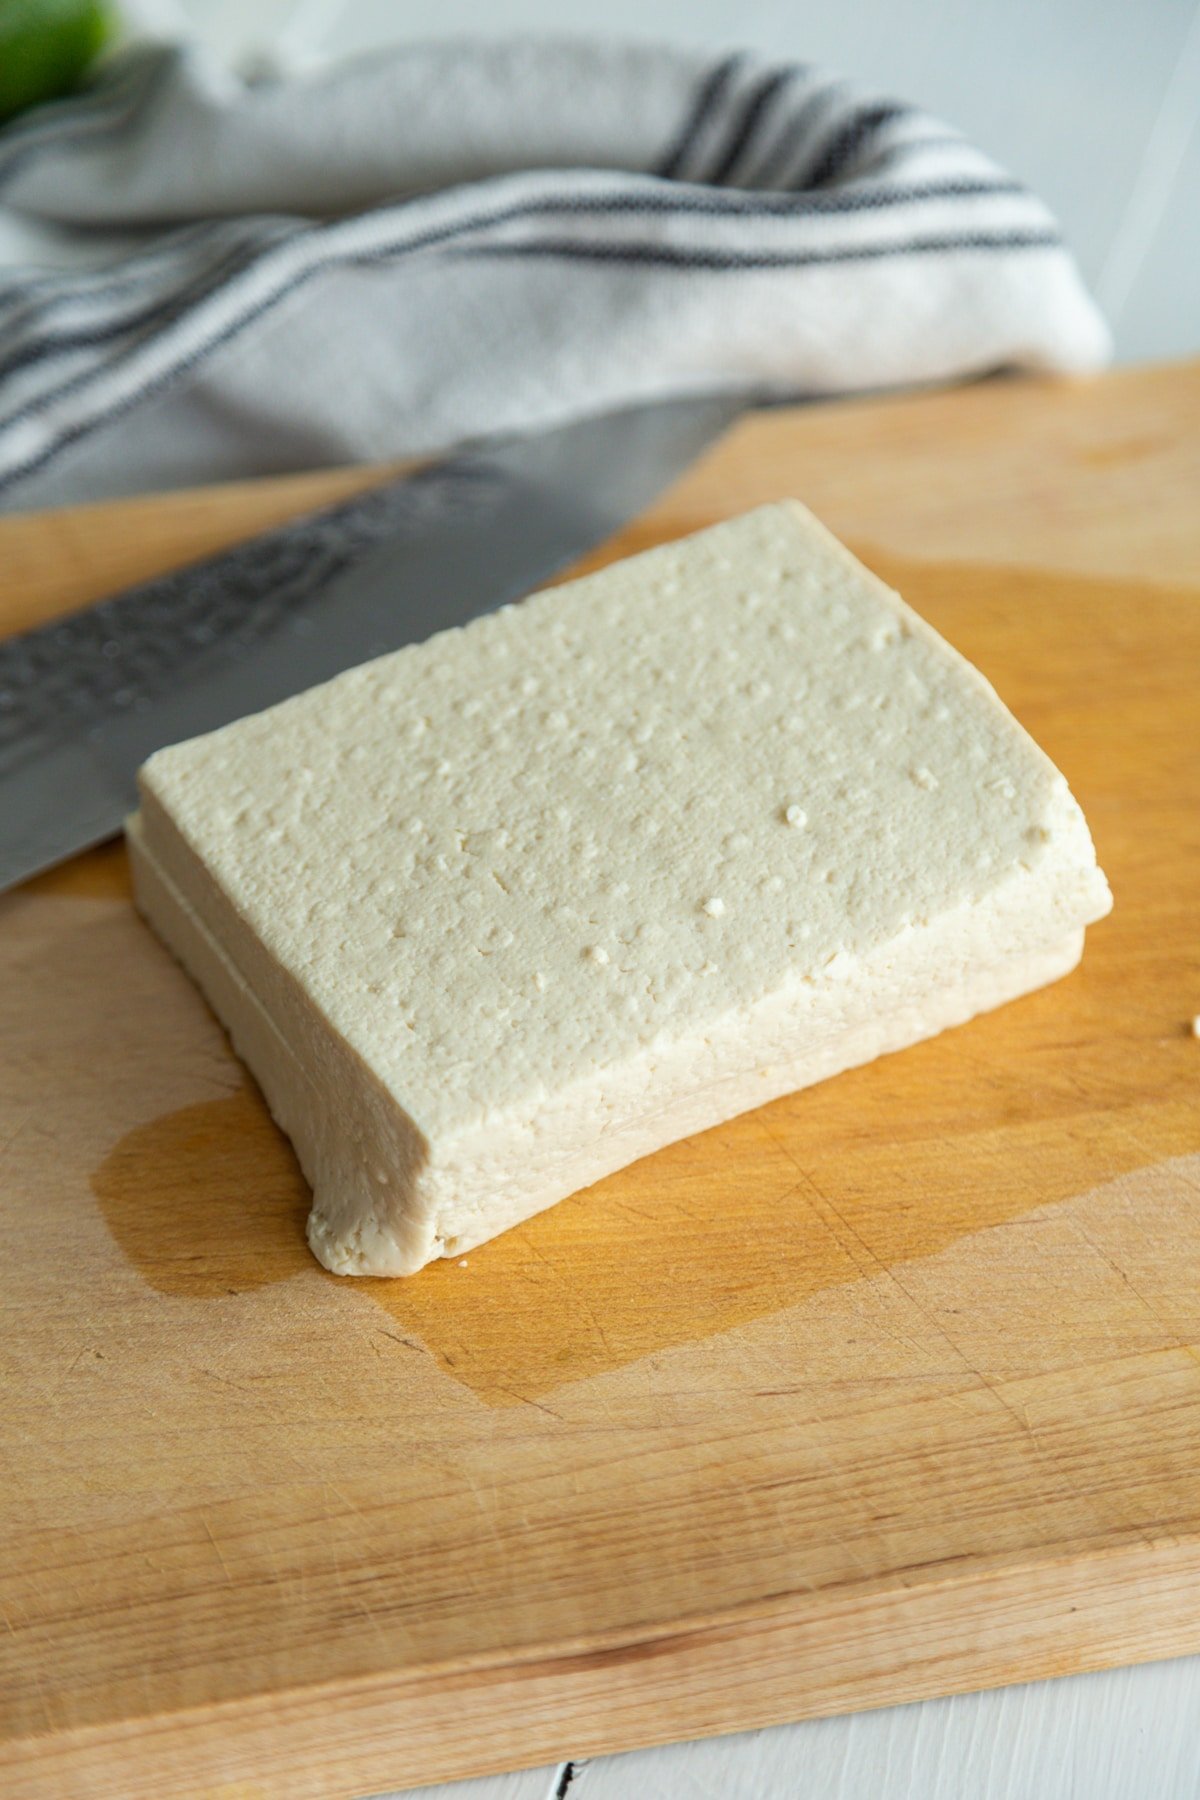 A square piece of tofu cut in half on a wooden board.